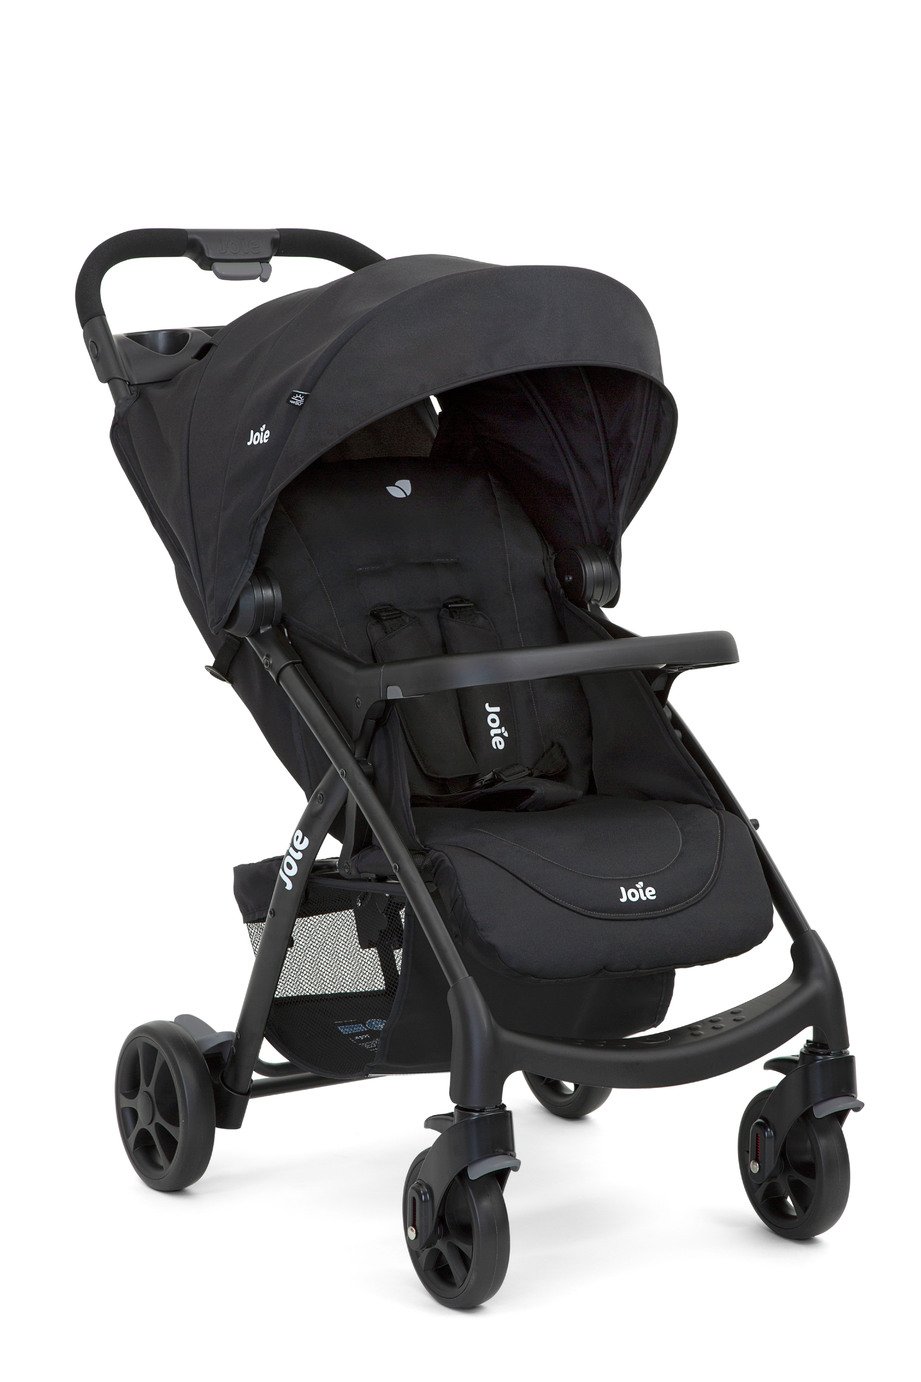 Joie Muze Travel System Review